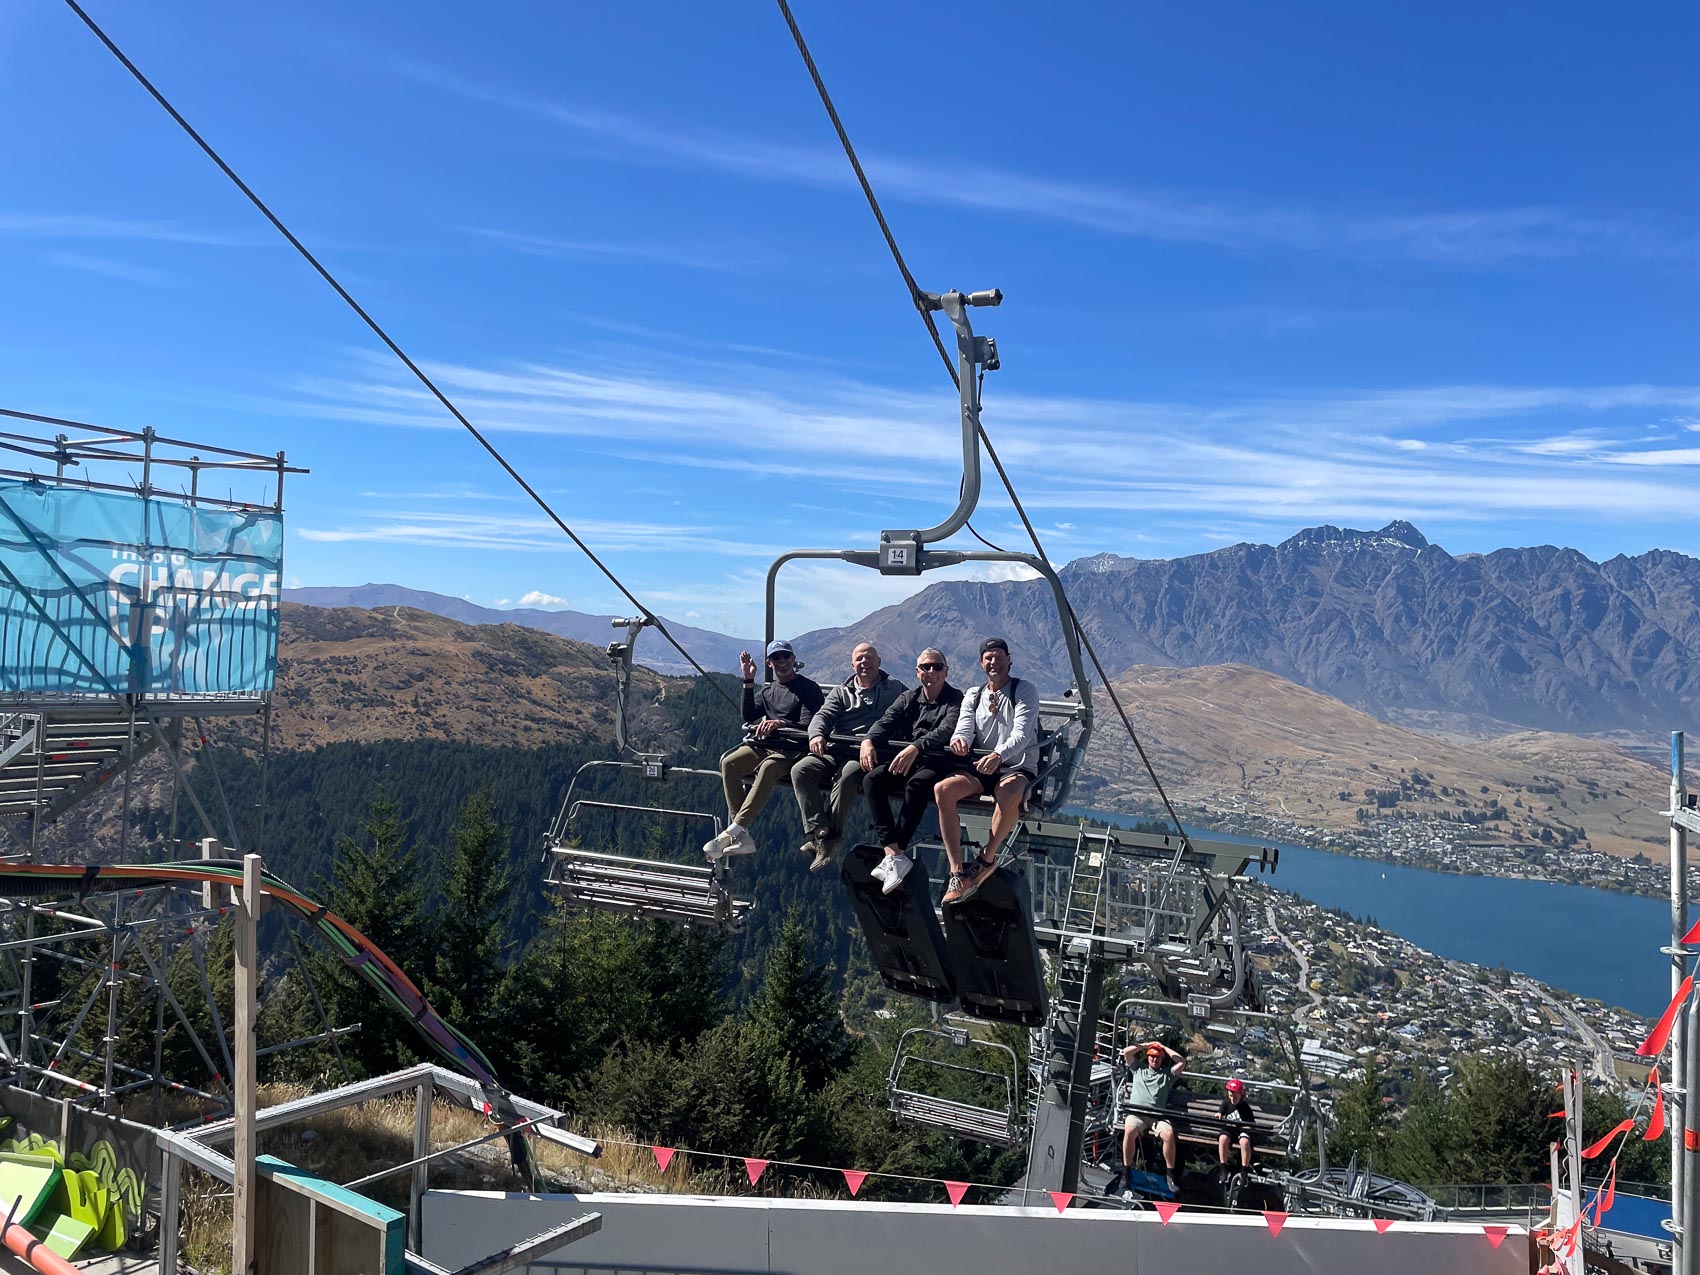 the ski lift to get to the luge run in New Zealand